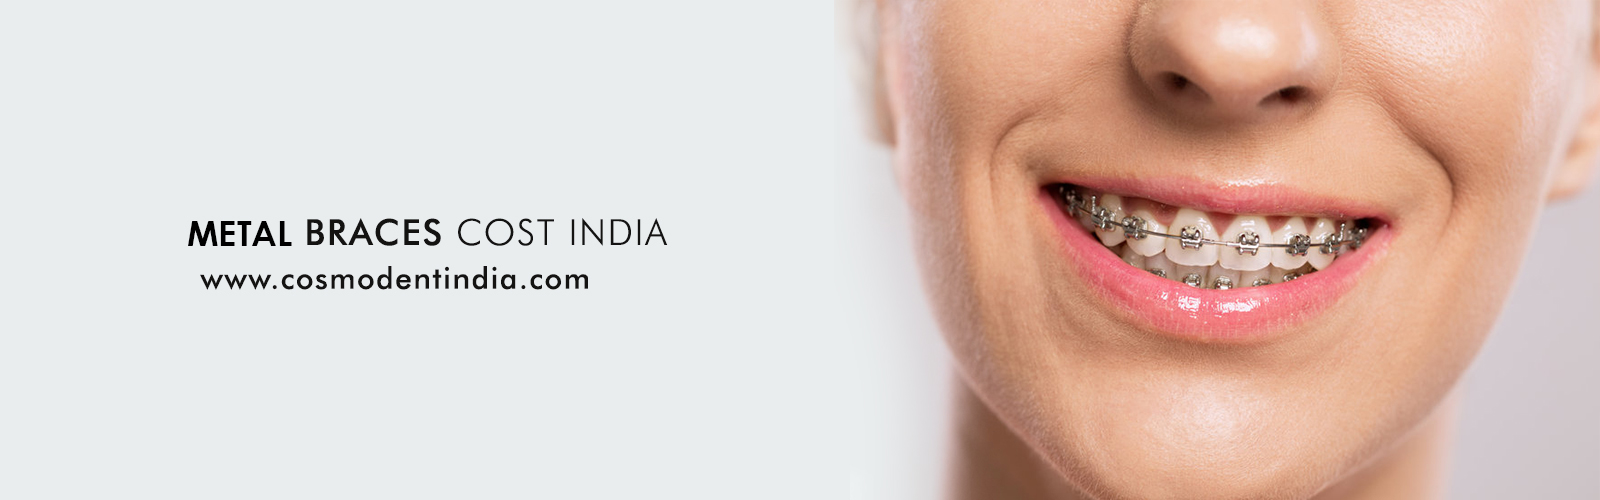 metal-braces-cost-in-india